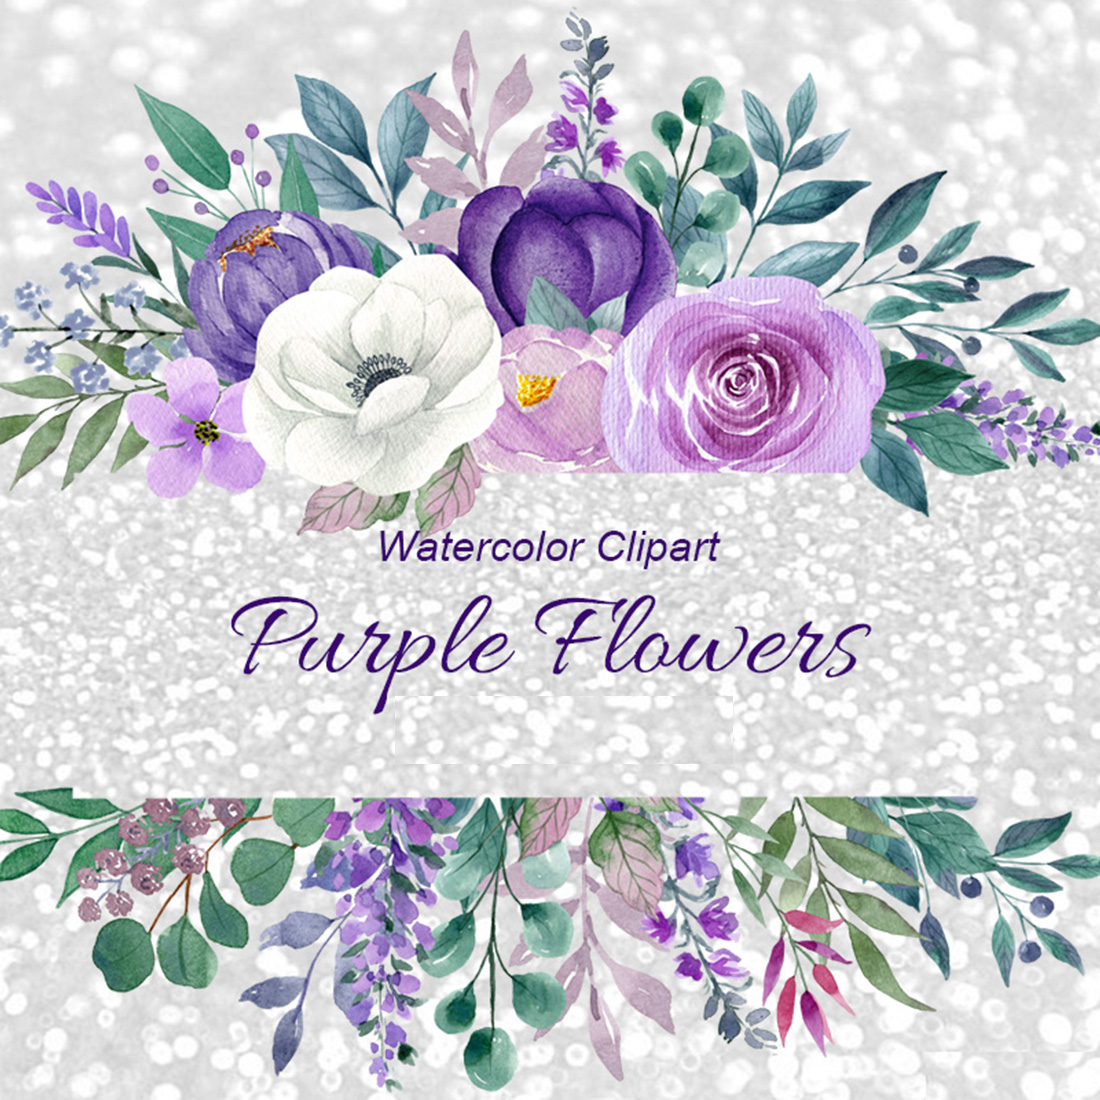 Black White and Gold Flowers PNG, Watercolor Floral Clipart Bouquets,  Elements, Commercial Use, Digital Clipart PNG 